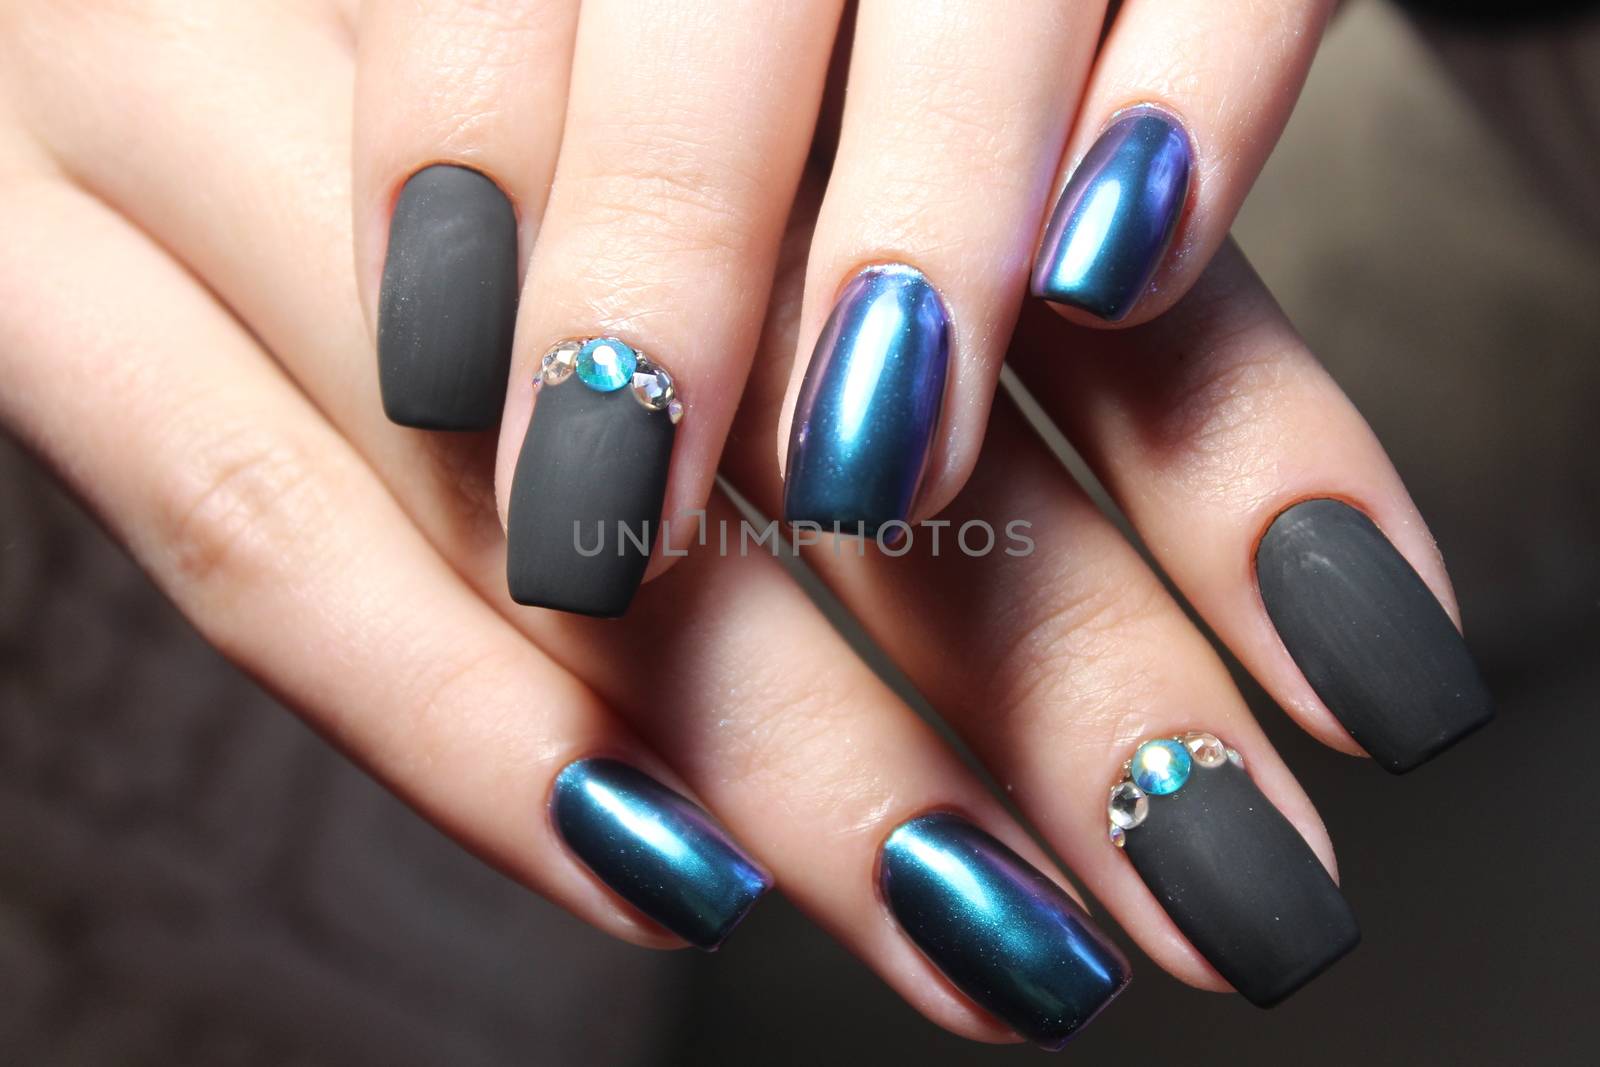 Sexual nail design by SmirMaxStock